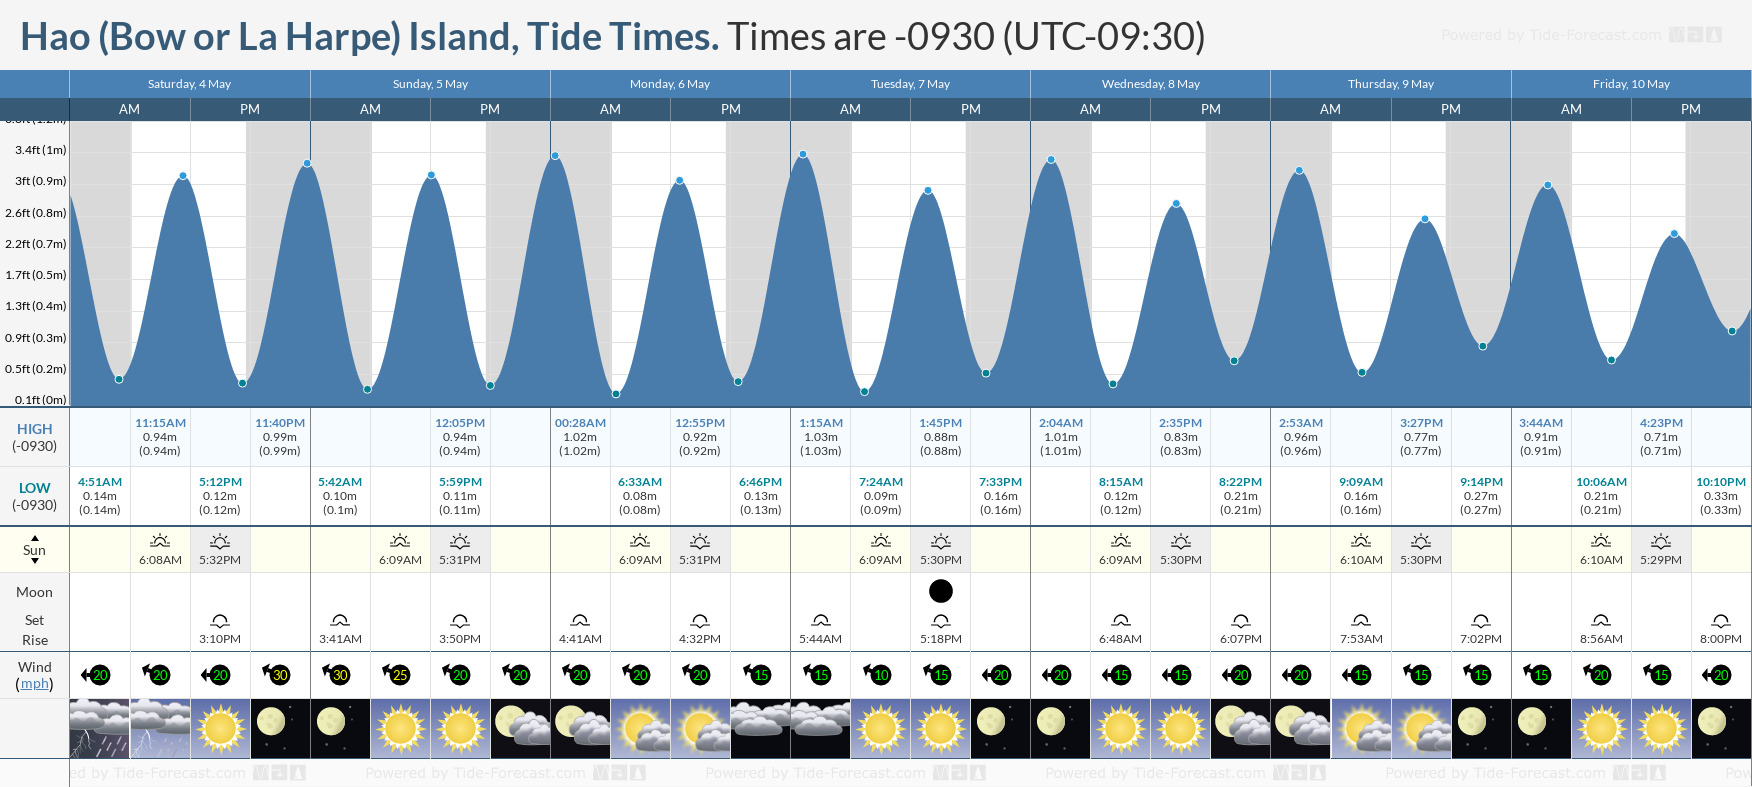 Hao (Bow or La Harpe) Island Tide Chart including high and low tide tide times for the next 7 days